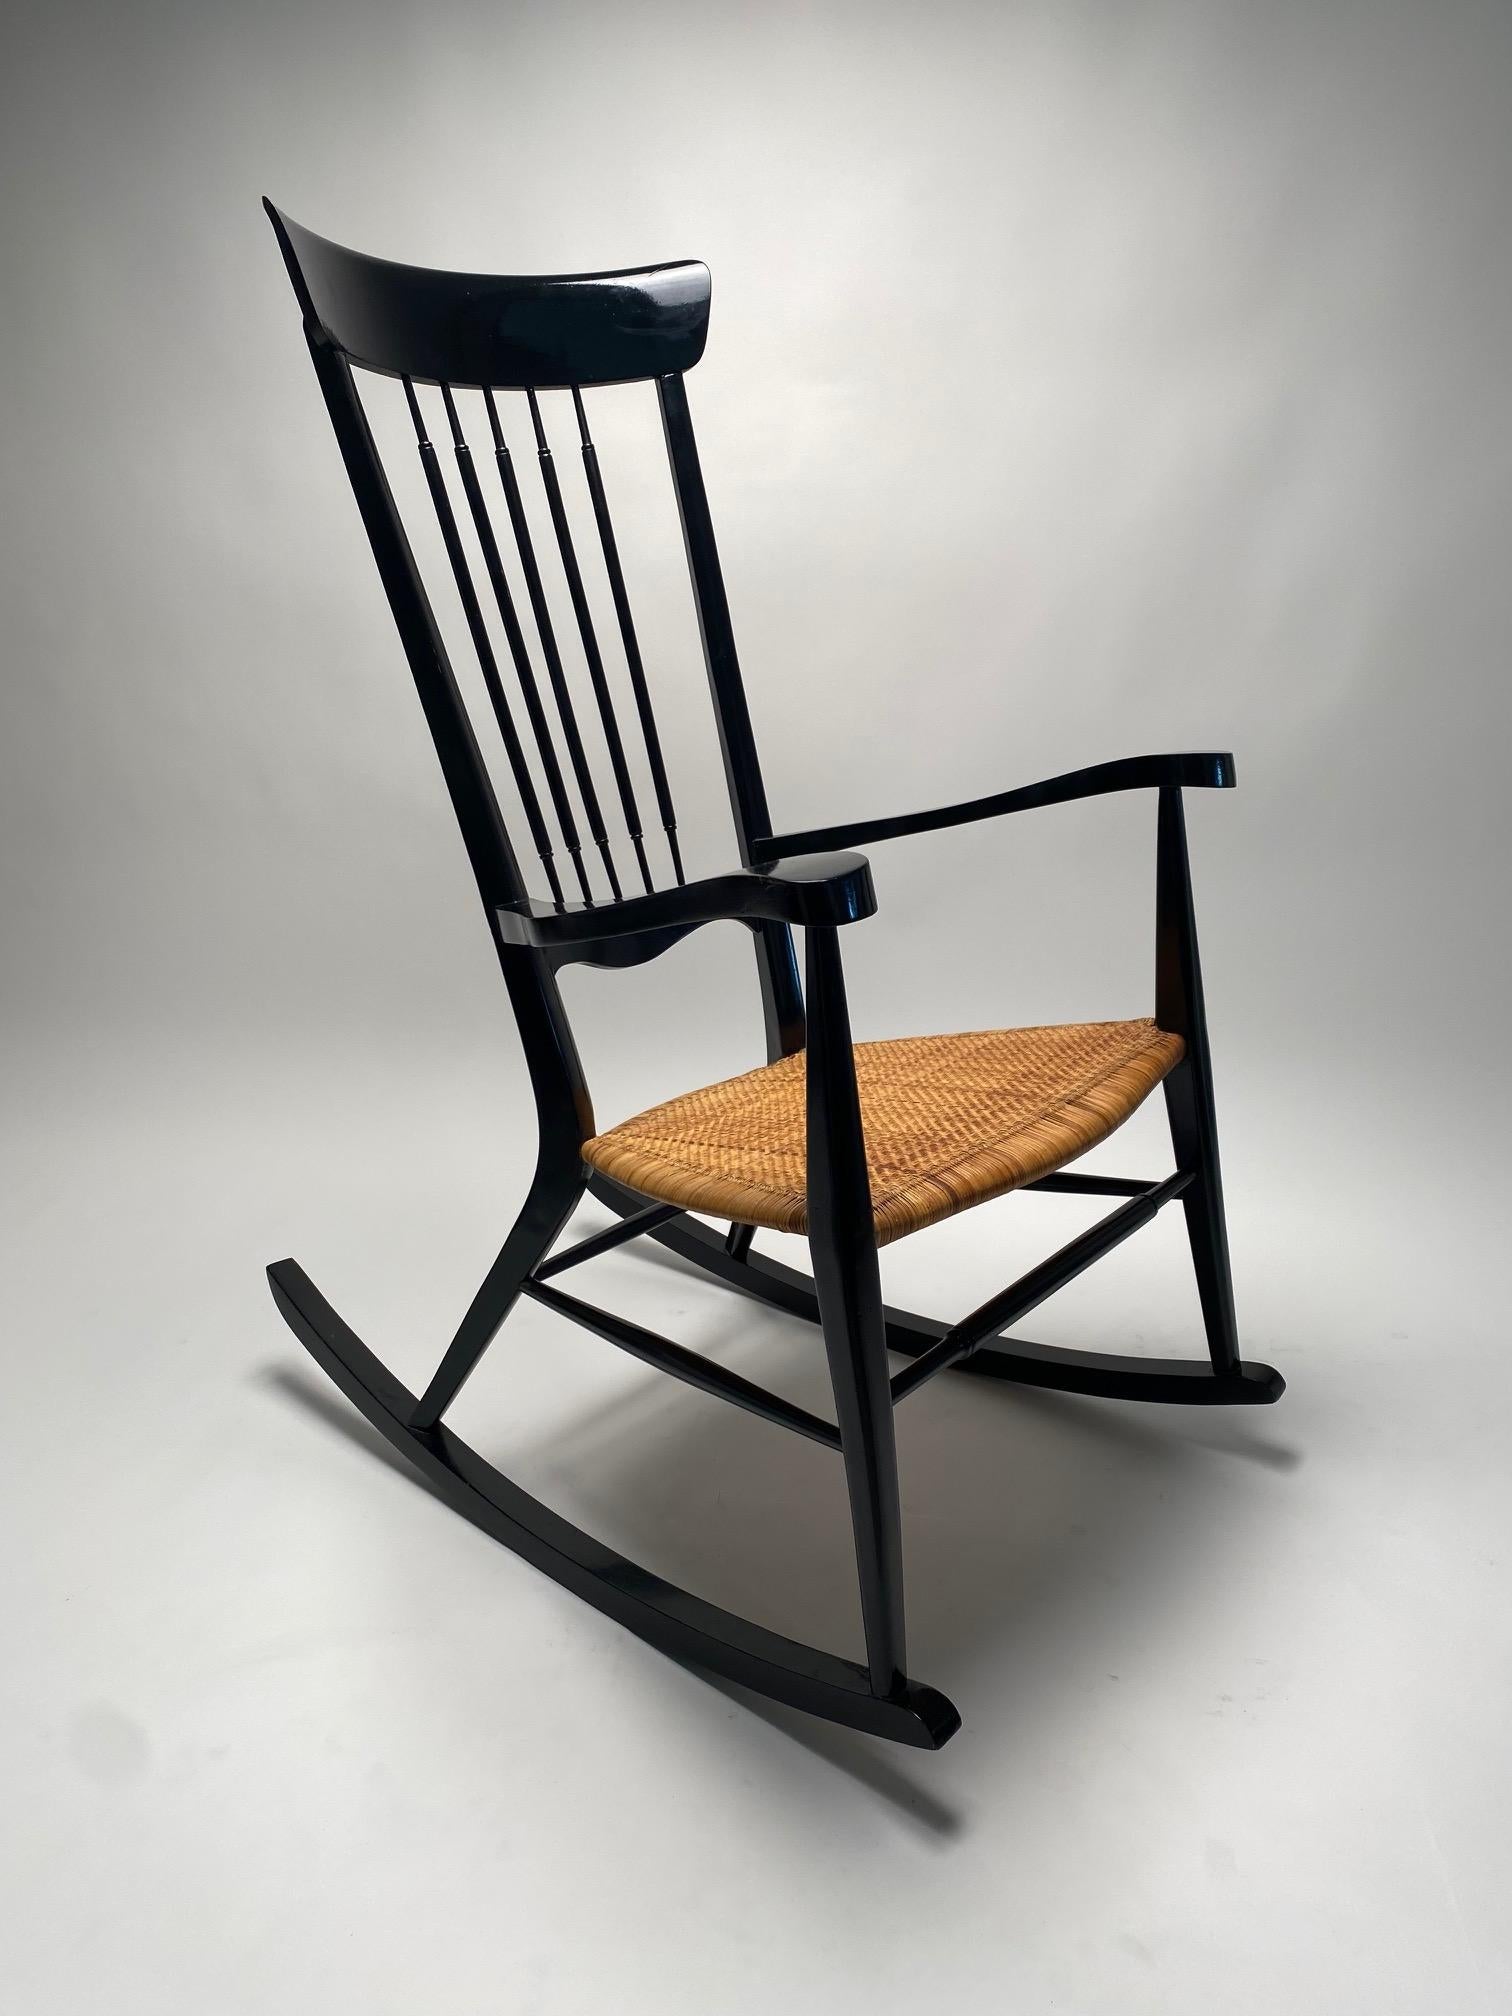 Rare Italian Mid-Century Rocking chair, in the style of Paolo Buffa, made in the 1950s.

This rocking chair in black lacquered wood, with seat in woven straw, is an iconic and highly refined example of Italian design. With its slender and elegant